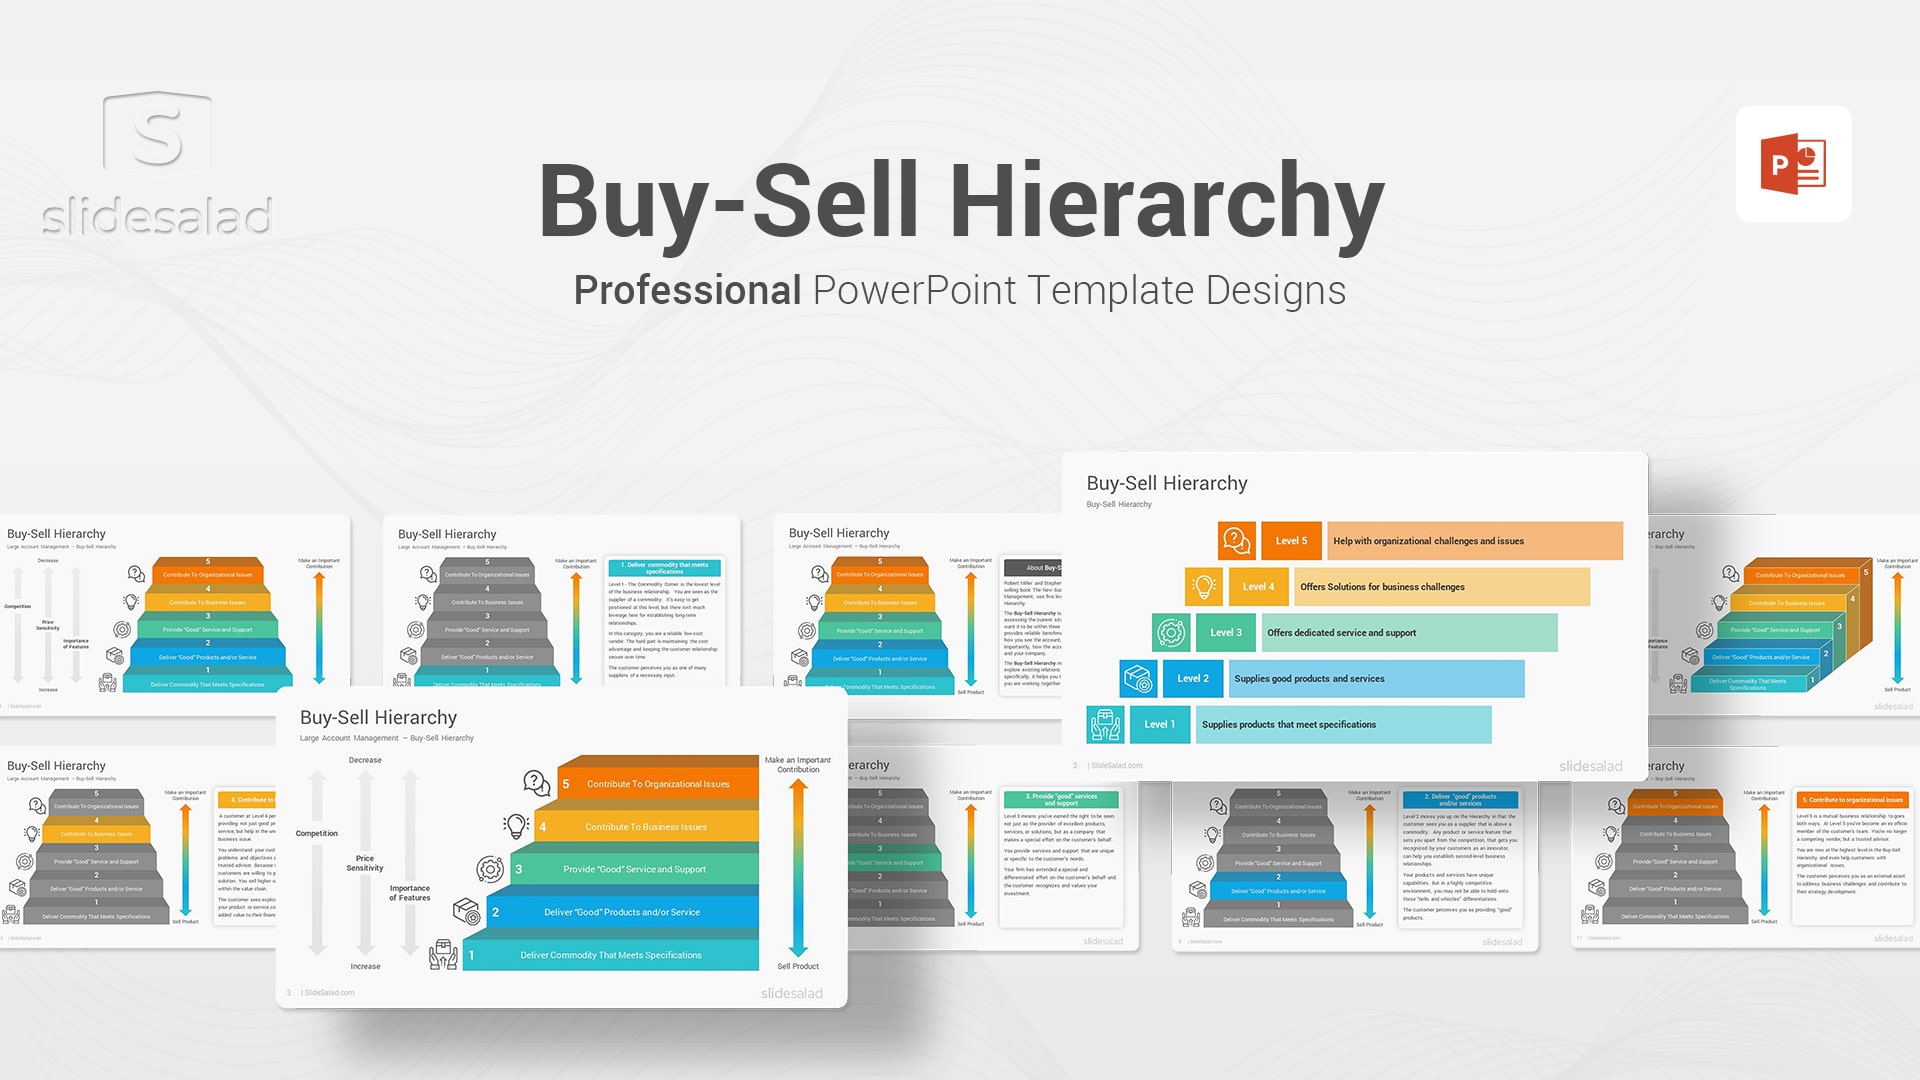 Buy-Sell Hierarchy PowerPoint Template Diagrams - Vibrant PPT Template Designs for Powerful Sales Presentations